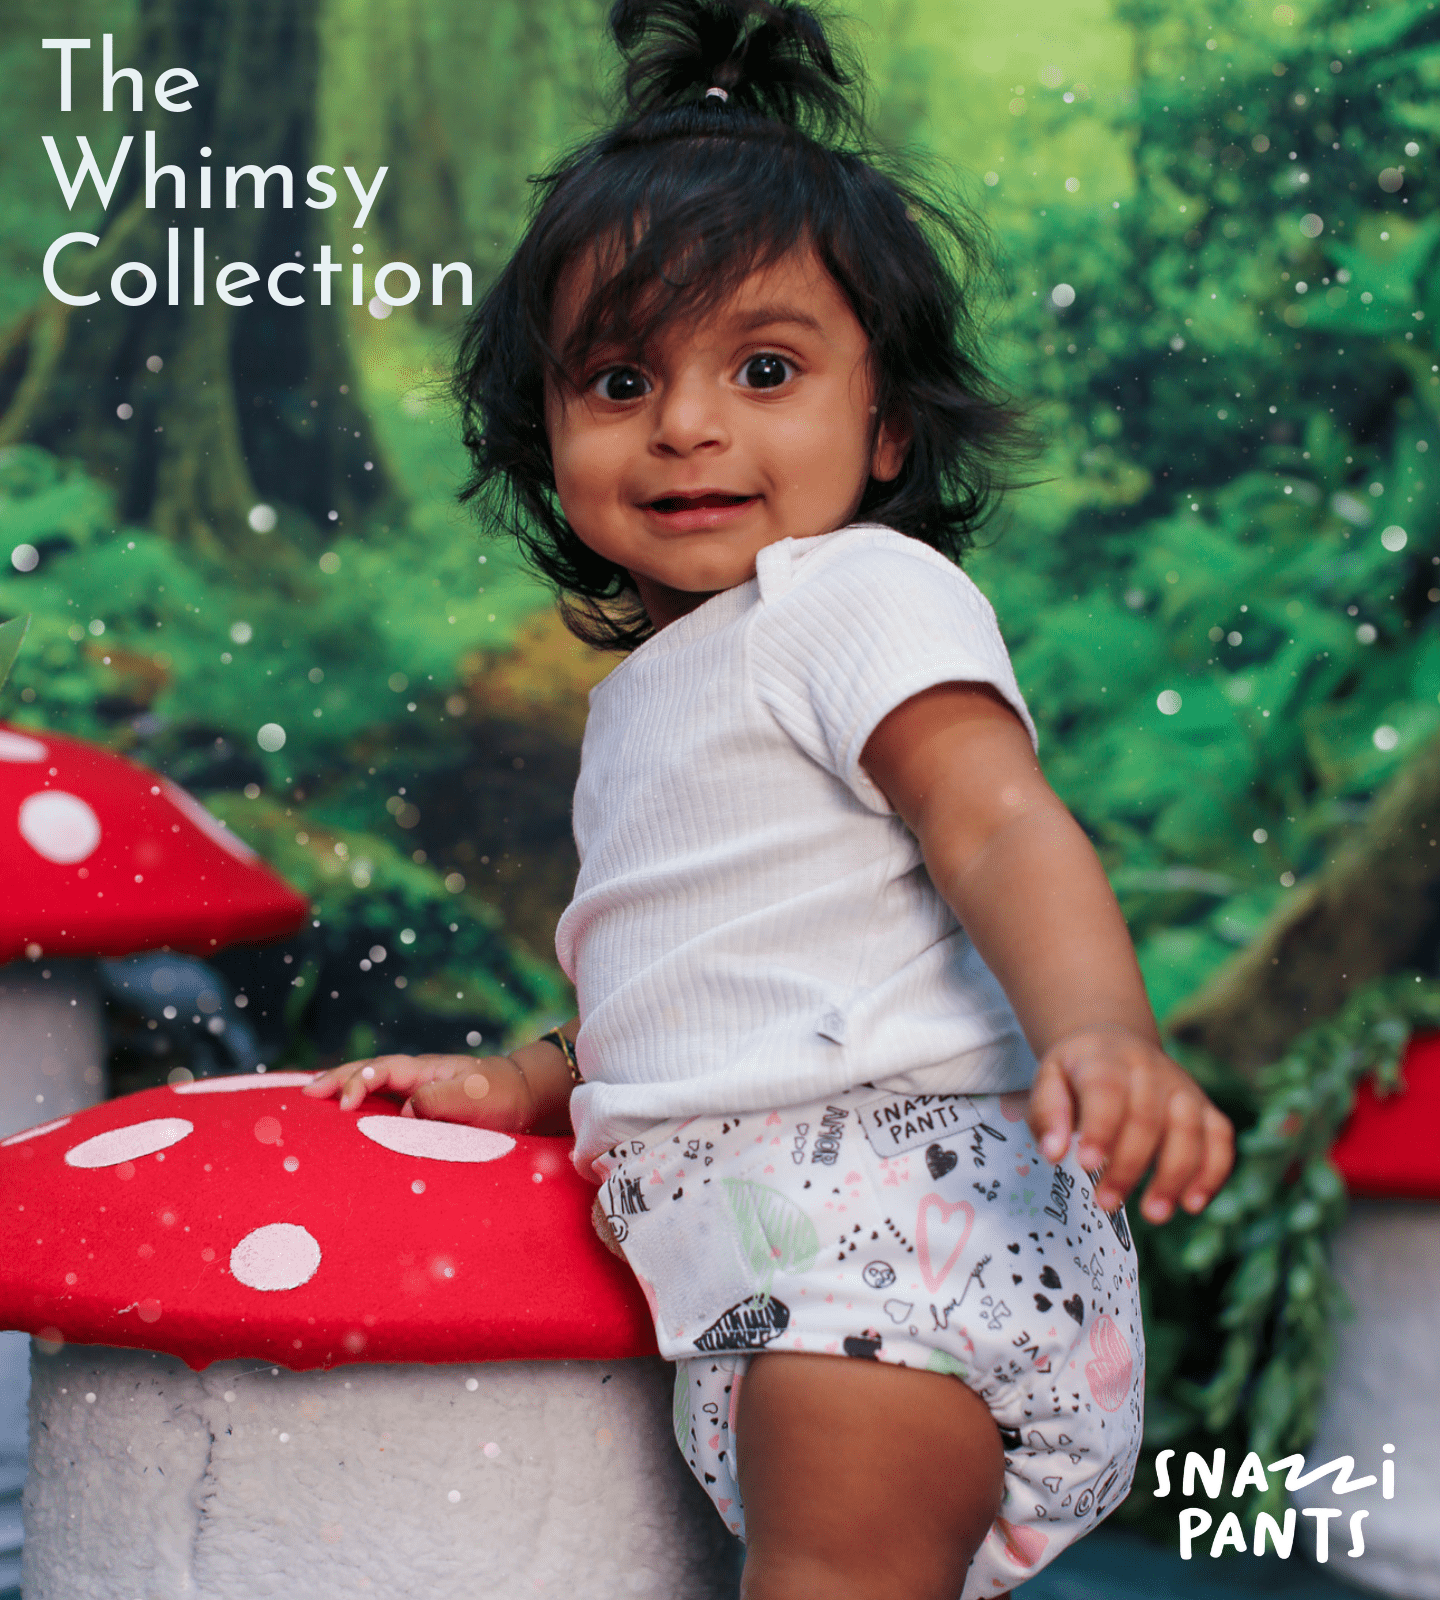 The Whimsy Collection